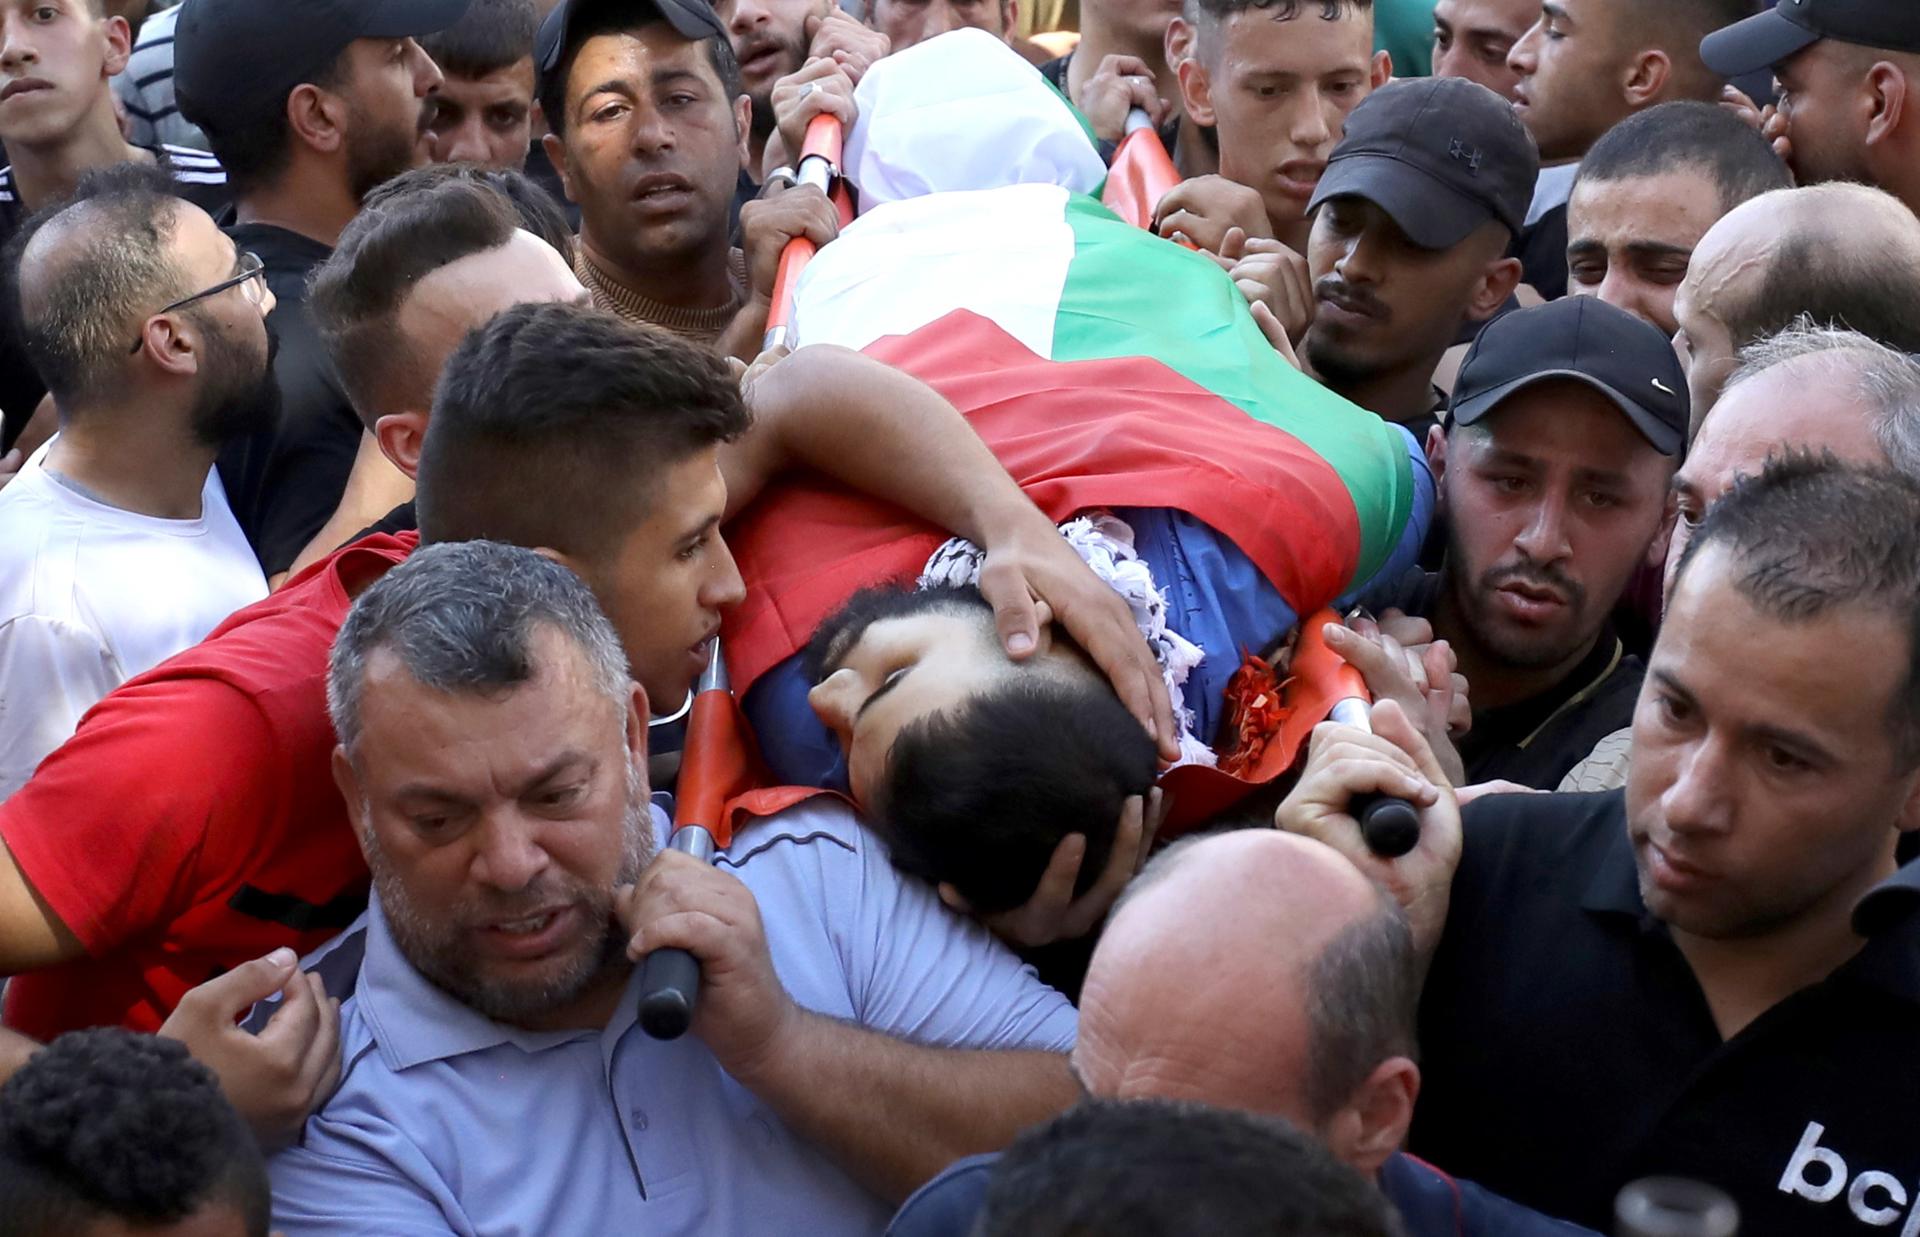 A man touches the body of Mohamed Nada during his funeral after he was killed in an Israeli raid at Al Ein refugee camp near the West Bank city of Nablus, 26 July 2023. EFE-EPA/ALAA BADARNEH